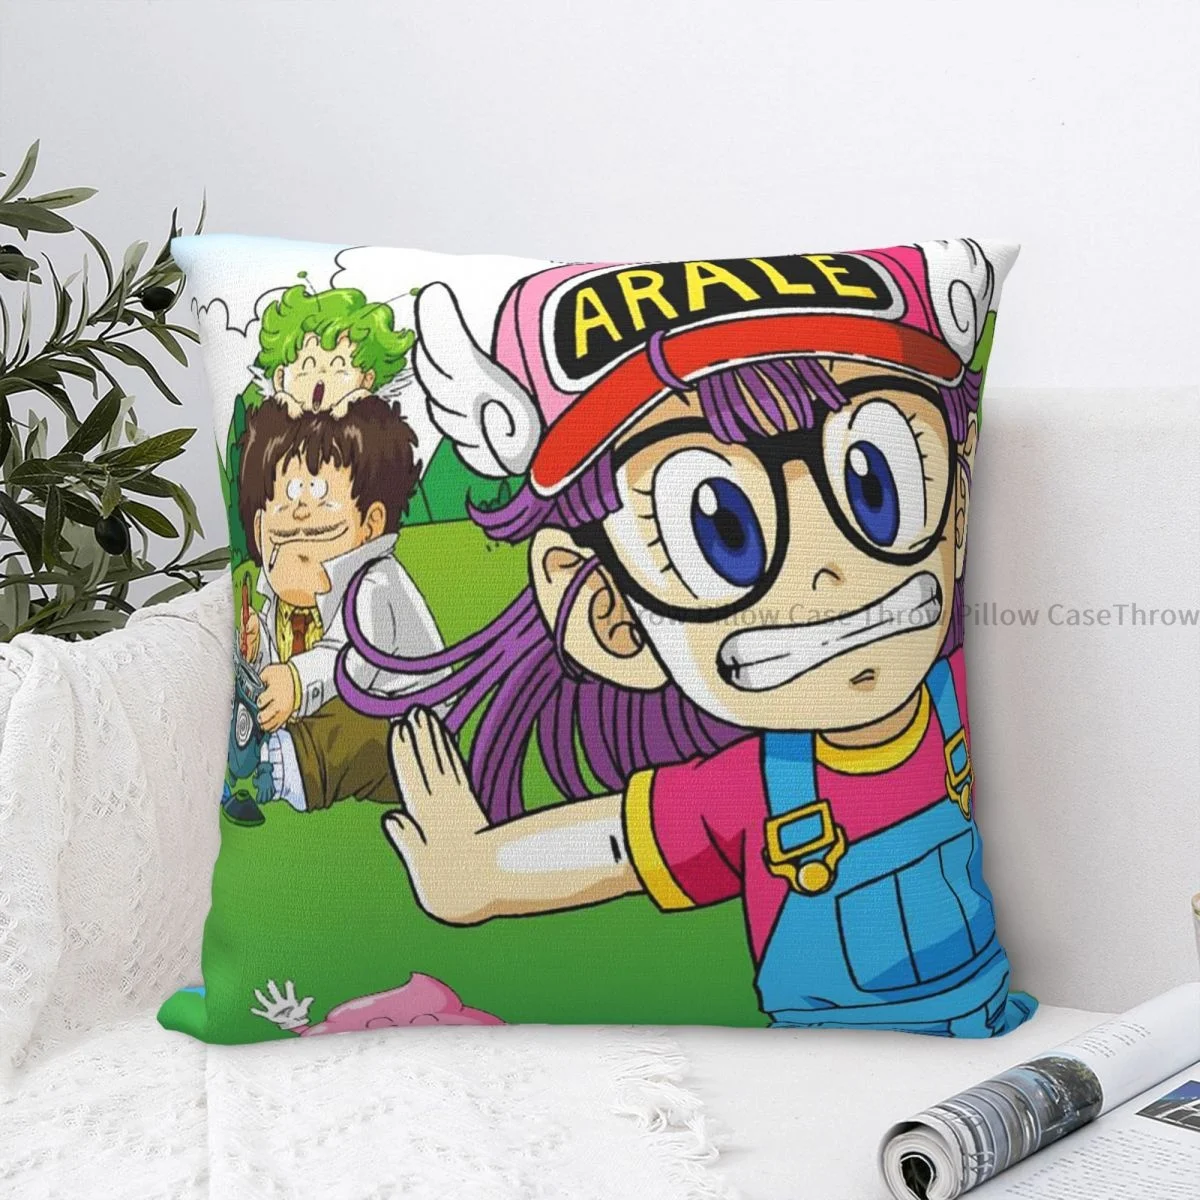 

ARALE Throw Pillow Case Dr Slump Robot Girl Anime Backpack Cushions Covers DIY Printed Washable Home Decor